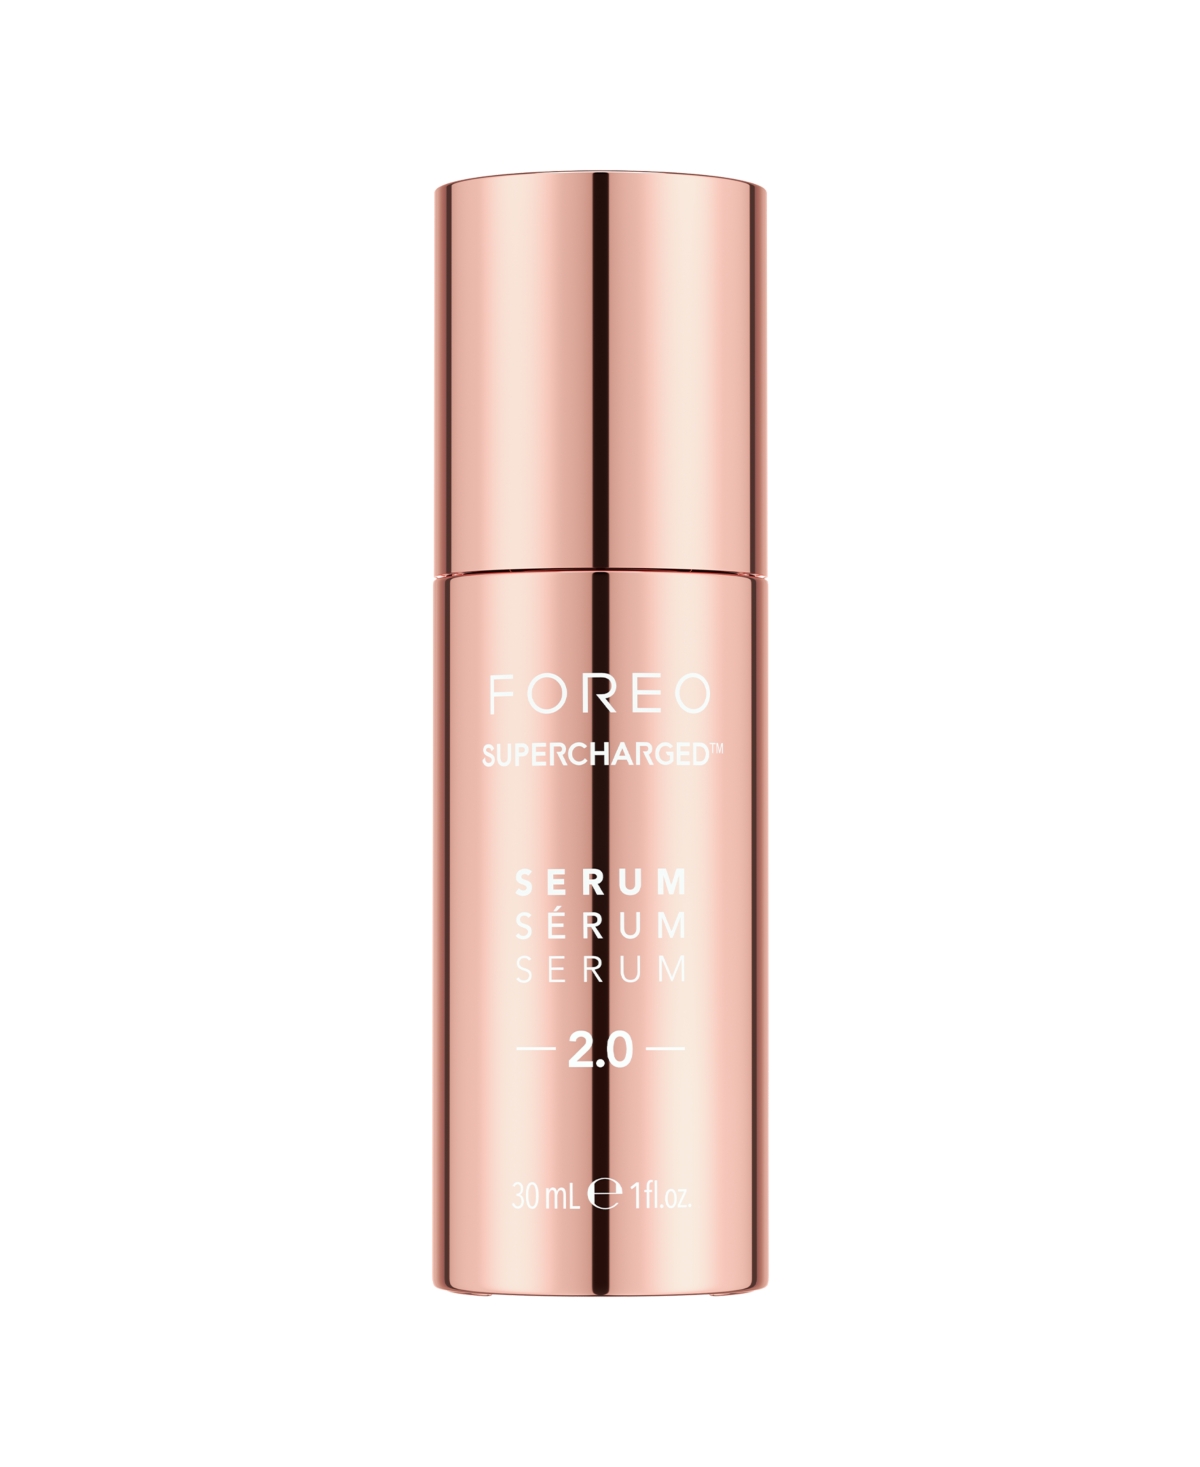 Foreo Supercharged Serum 2.0, 30ml In No Color